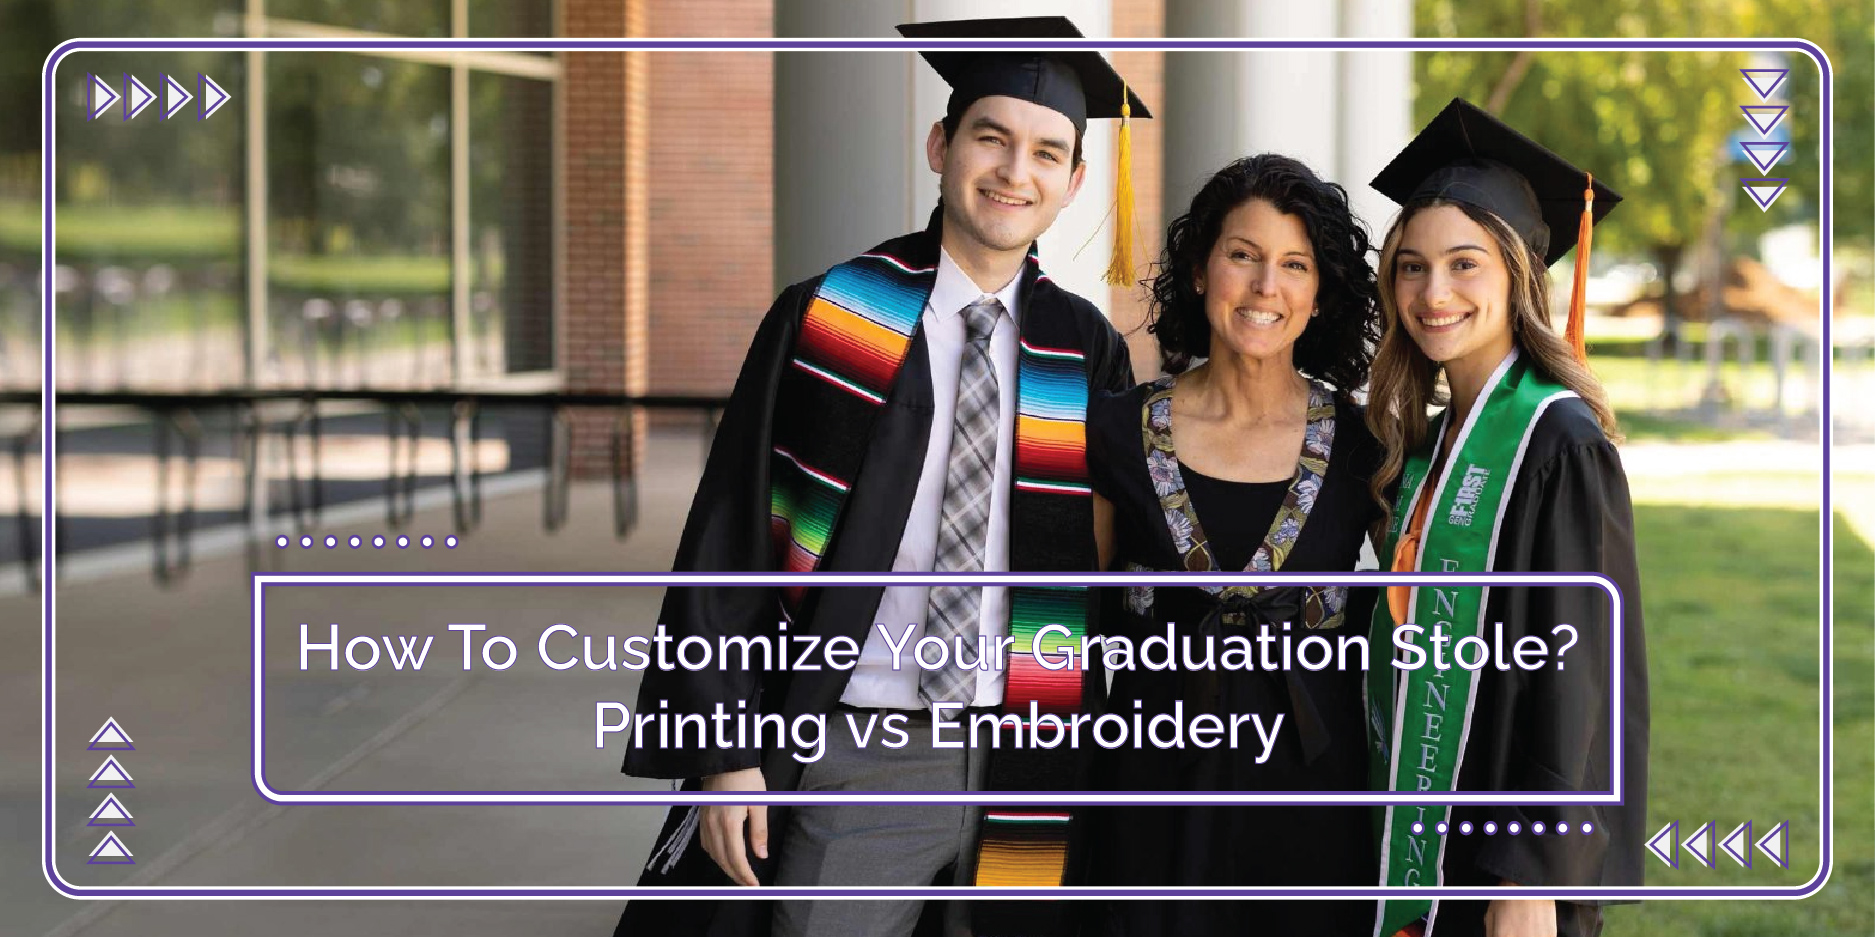 How To Customize Your Graduation Stole